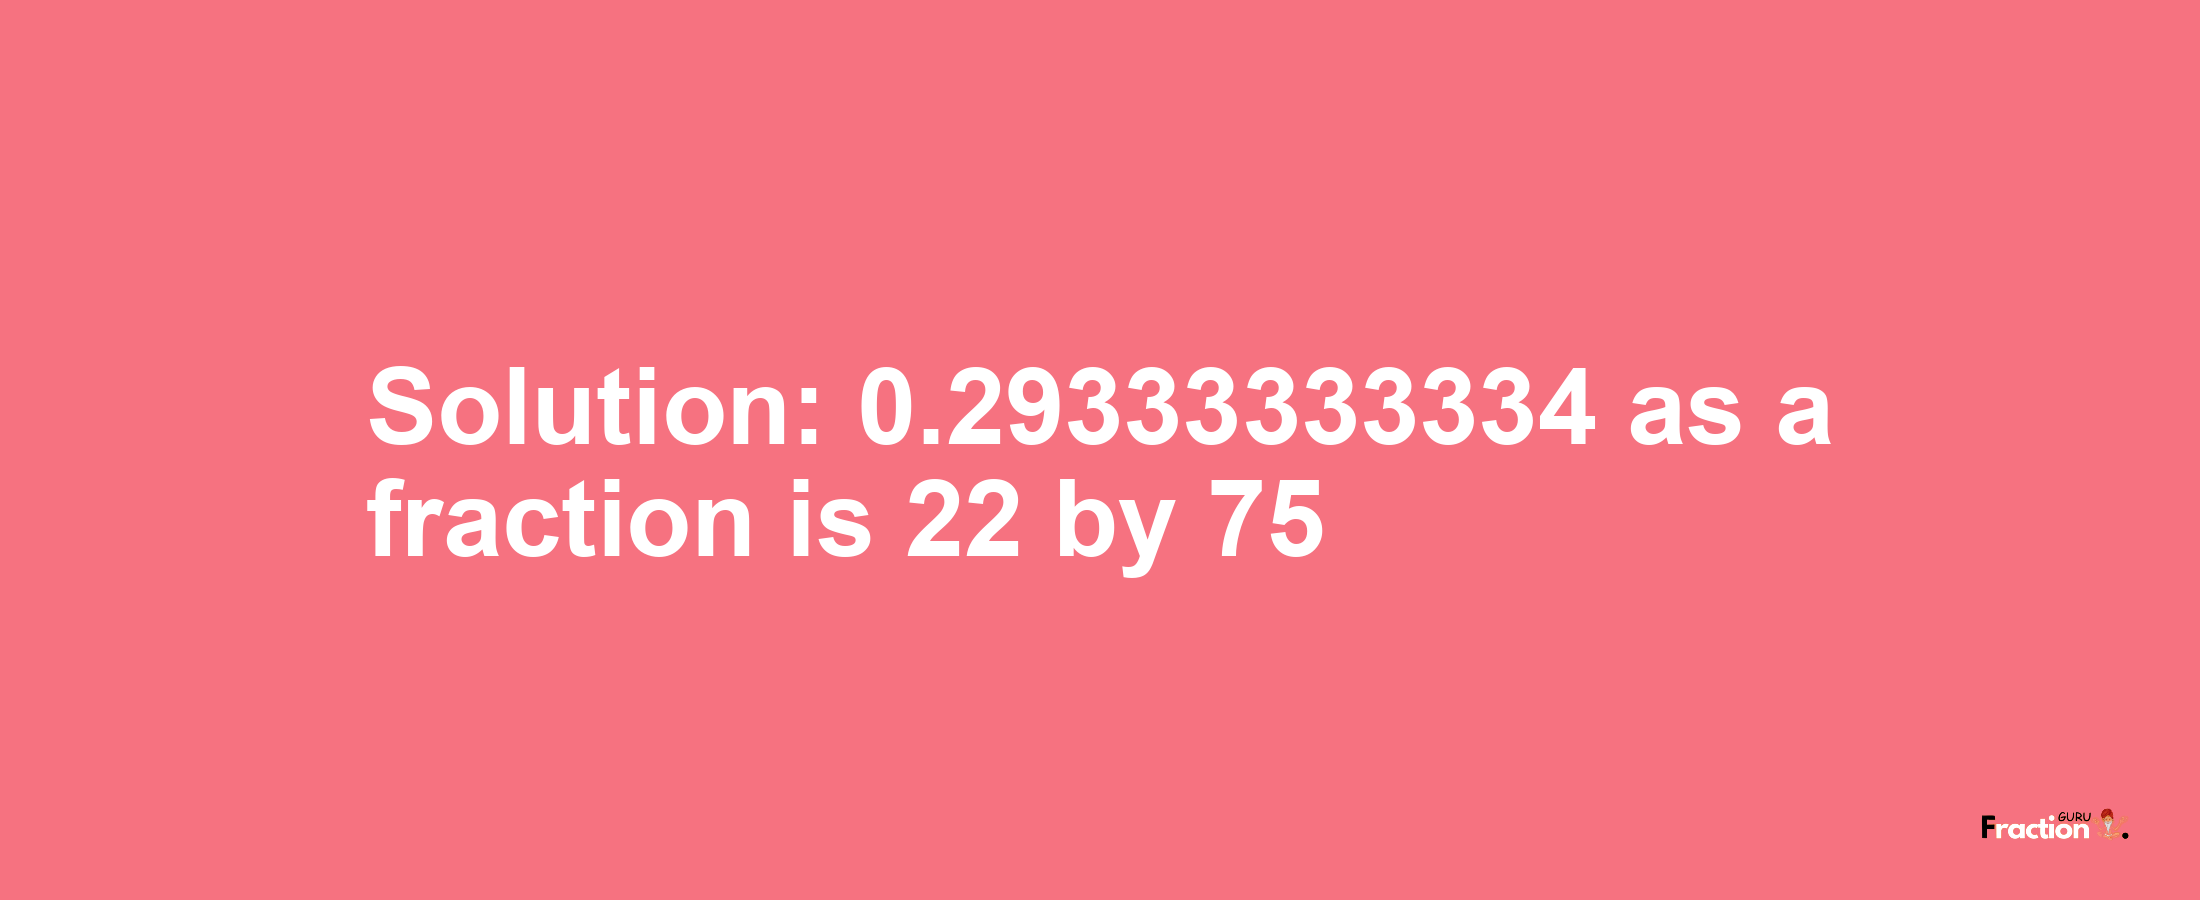 Solution:0.29333333334 as a fraction is 22/75